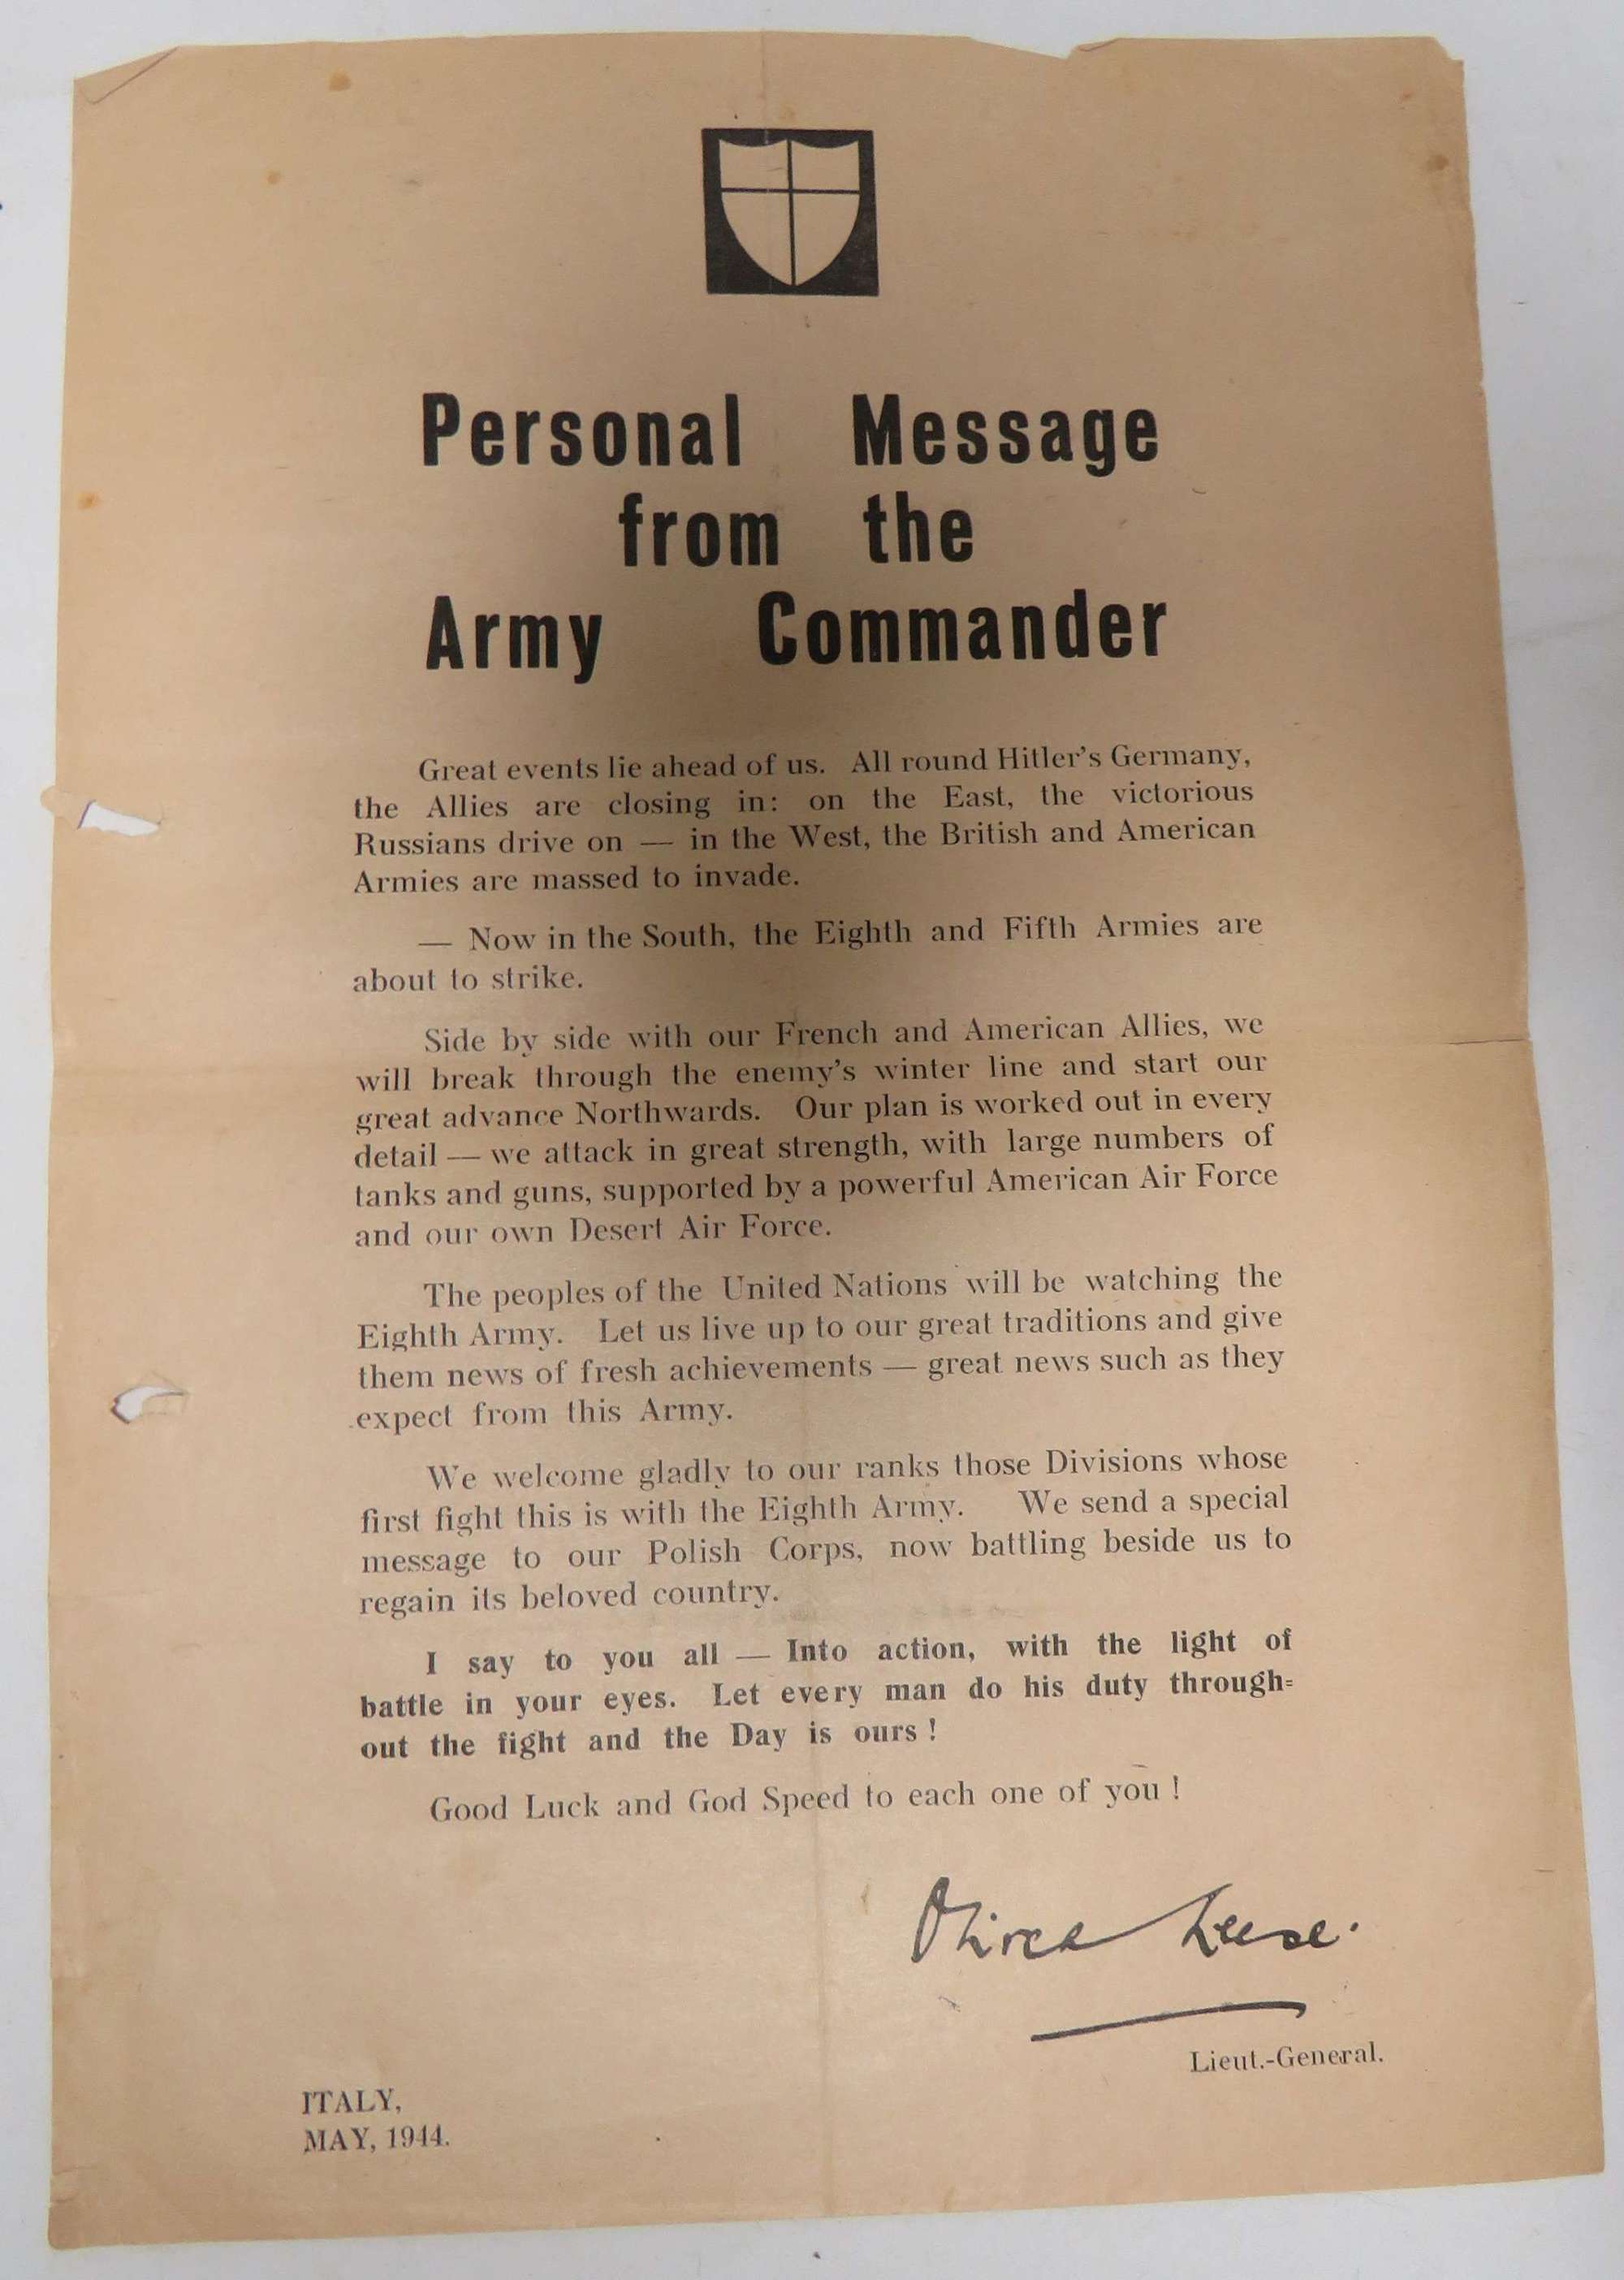 May 1944 Italy 8th Army Message